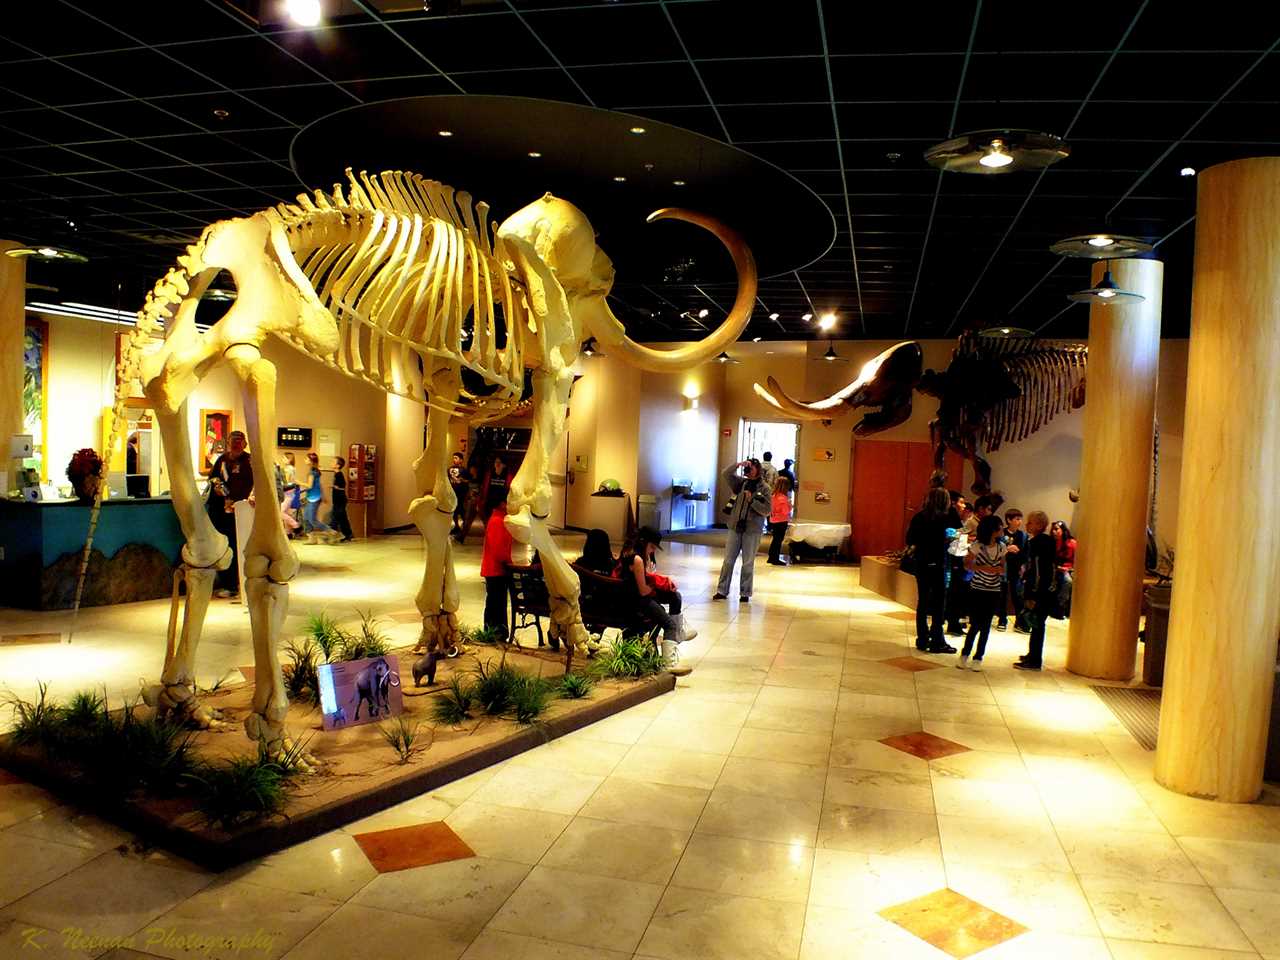 Skeleton of wooly mammoth inside of a museum.